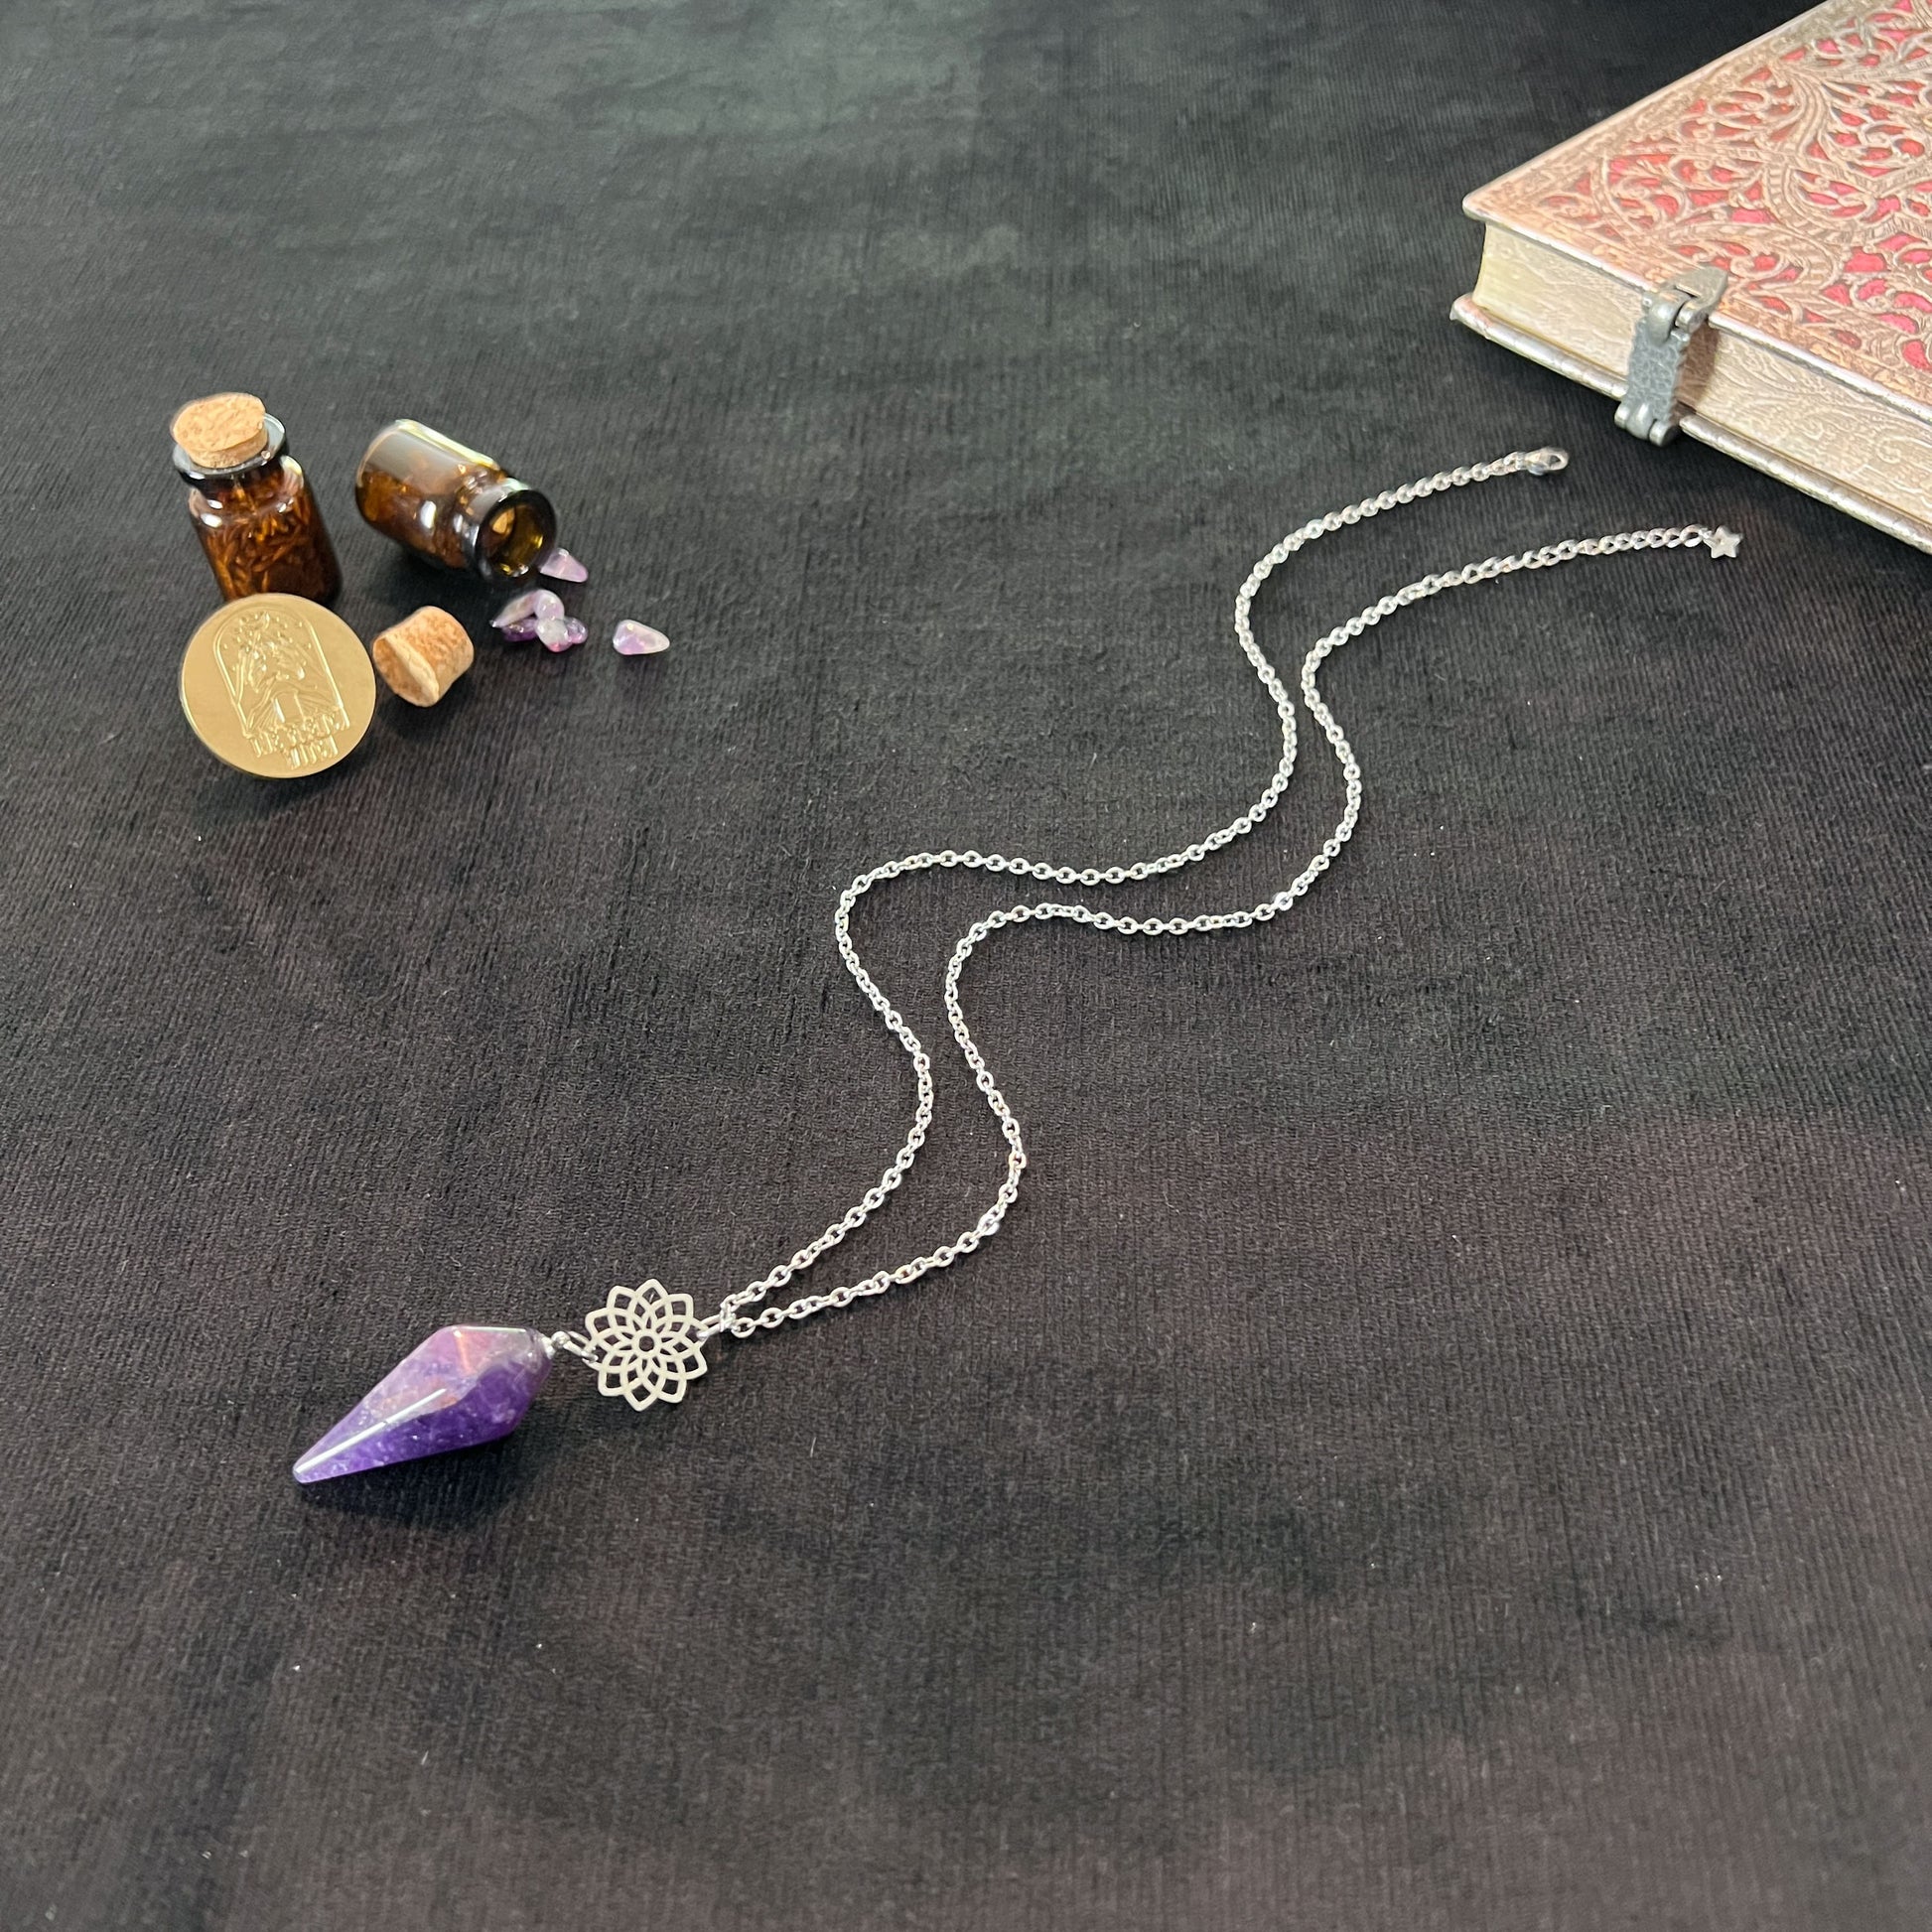 amethyst gemstone crystal pendulum necklace for dowsing divination witch spiritual jewelry